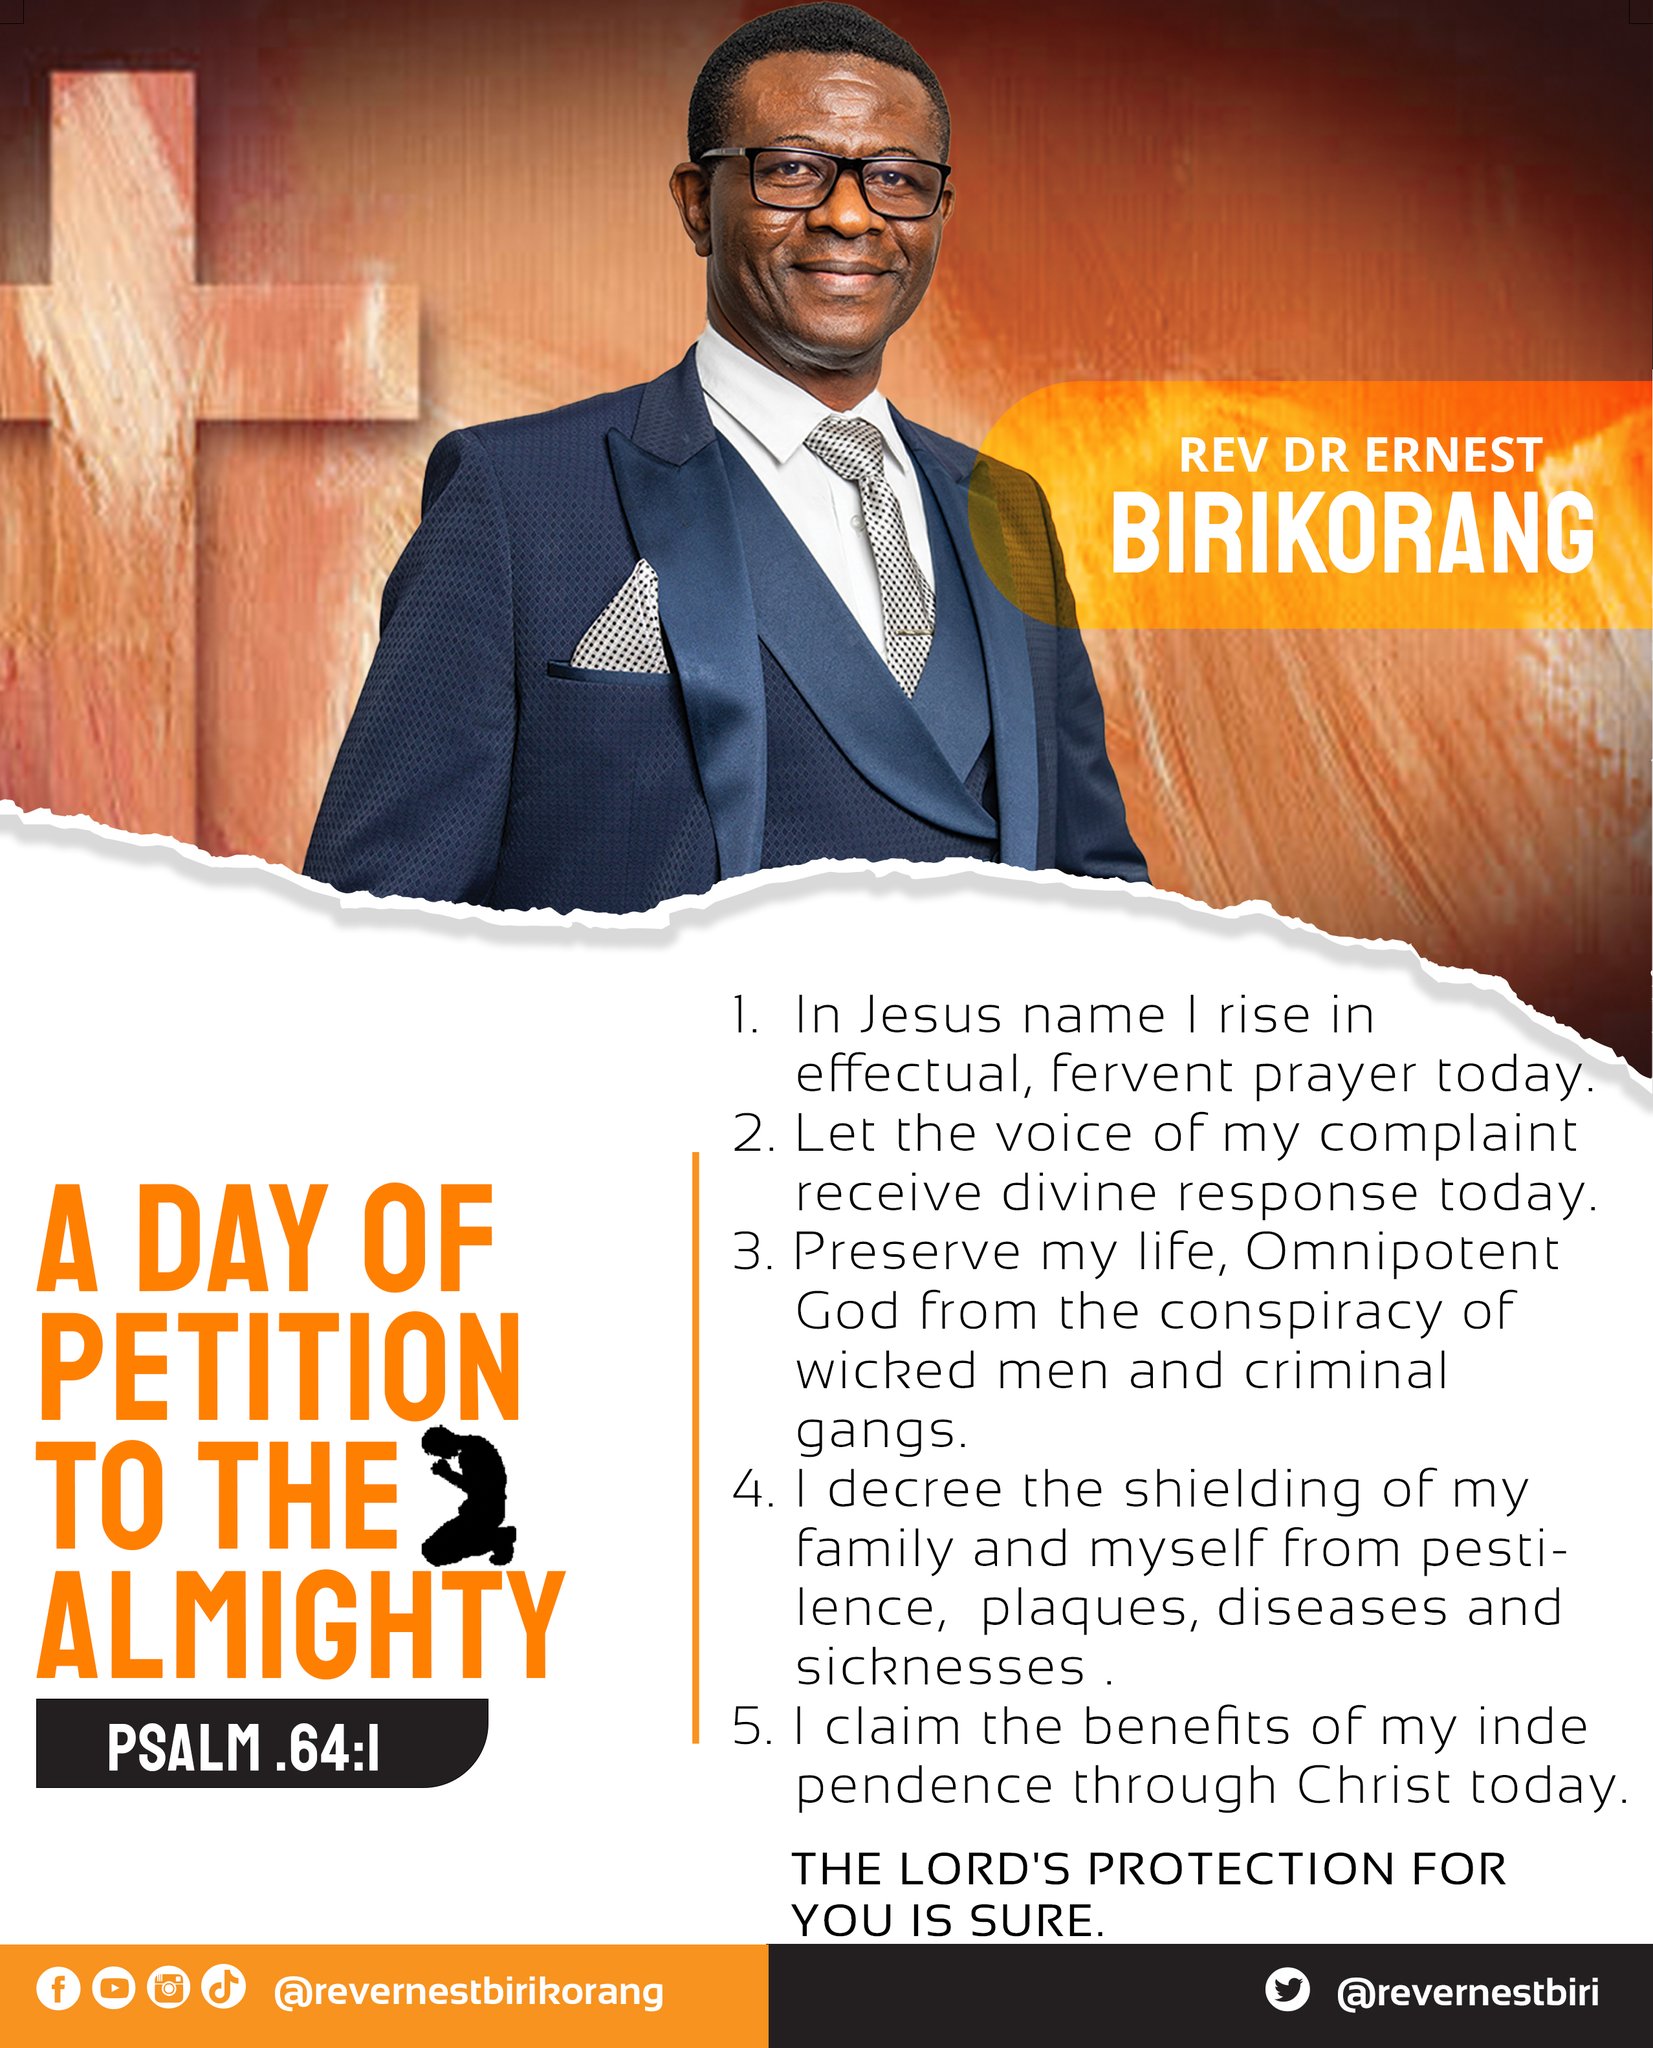 REV DR ERNEST BIRIKORANG In Jesus name rise in effectual, fervent prayer today. 2. Let the voice of my complaint receive divine response [oday_ A DAY OF 3. Preserve my life, Omnipotent God from the conspiracy of PETITION wicked men and criminal gangs. TO THE F 4.| decree the shielding of my family and myself from pesti - ALMiGHIY lence_ plaques, diseases and sicknesses PSALM.64:1 claim the benefits of my inde pendence through Christ today THE LORD'S PROTECTION FOR YOUIS SURE 00 @revermestbirikoramg @revernestbiri